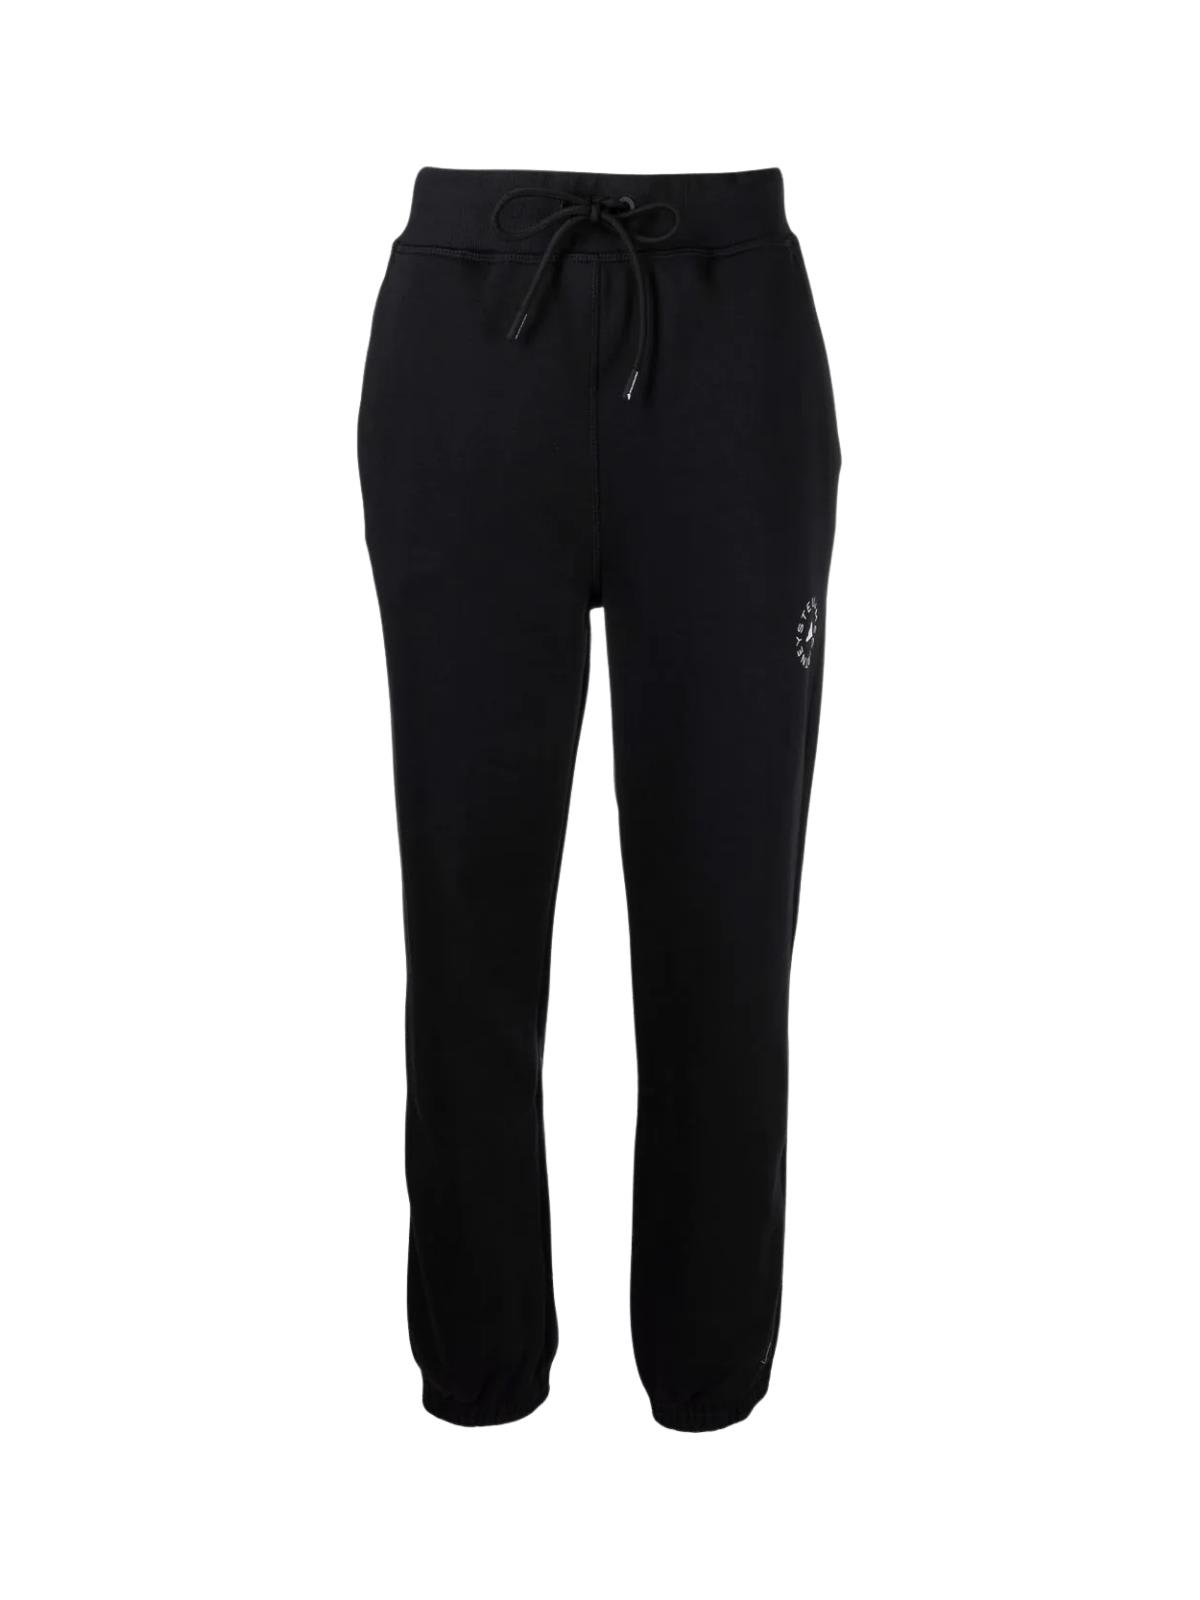 Adidas by Stella McCartney Asmc Aok Swt Pt Trousers